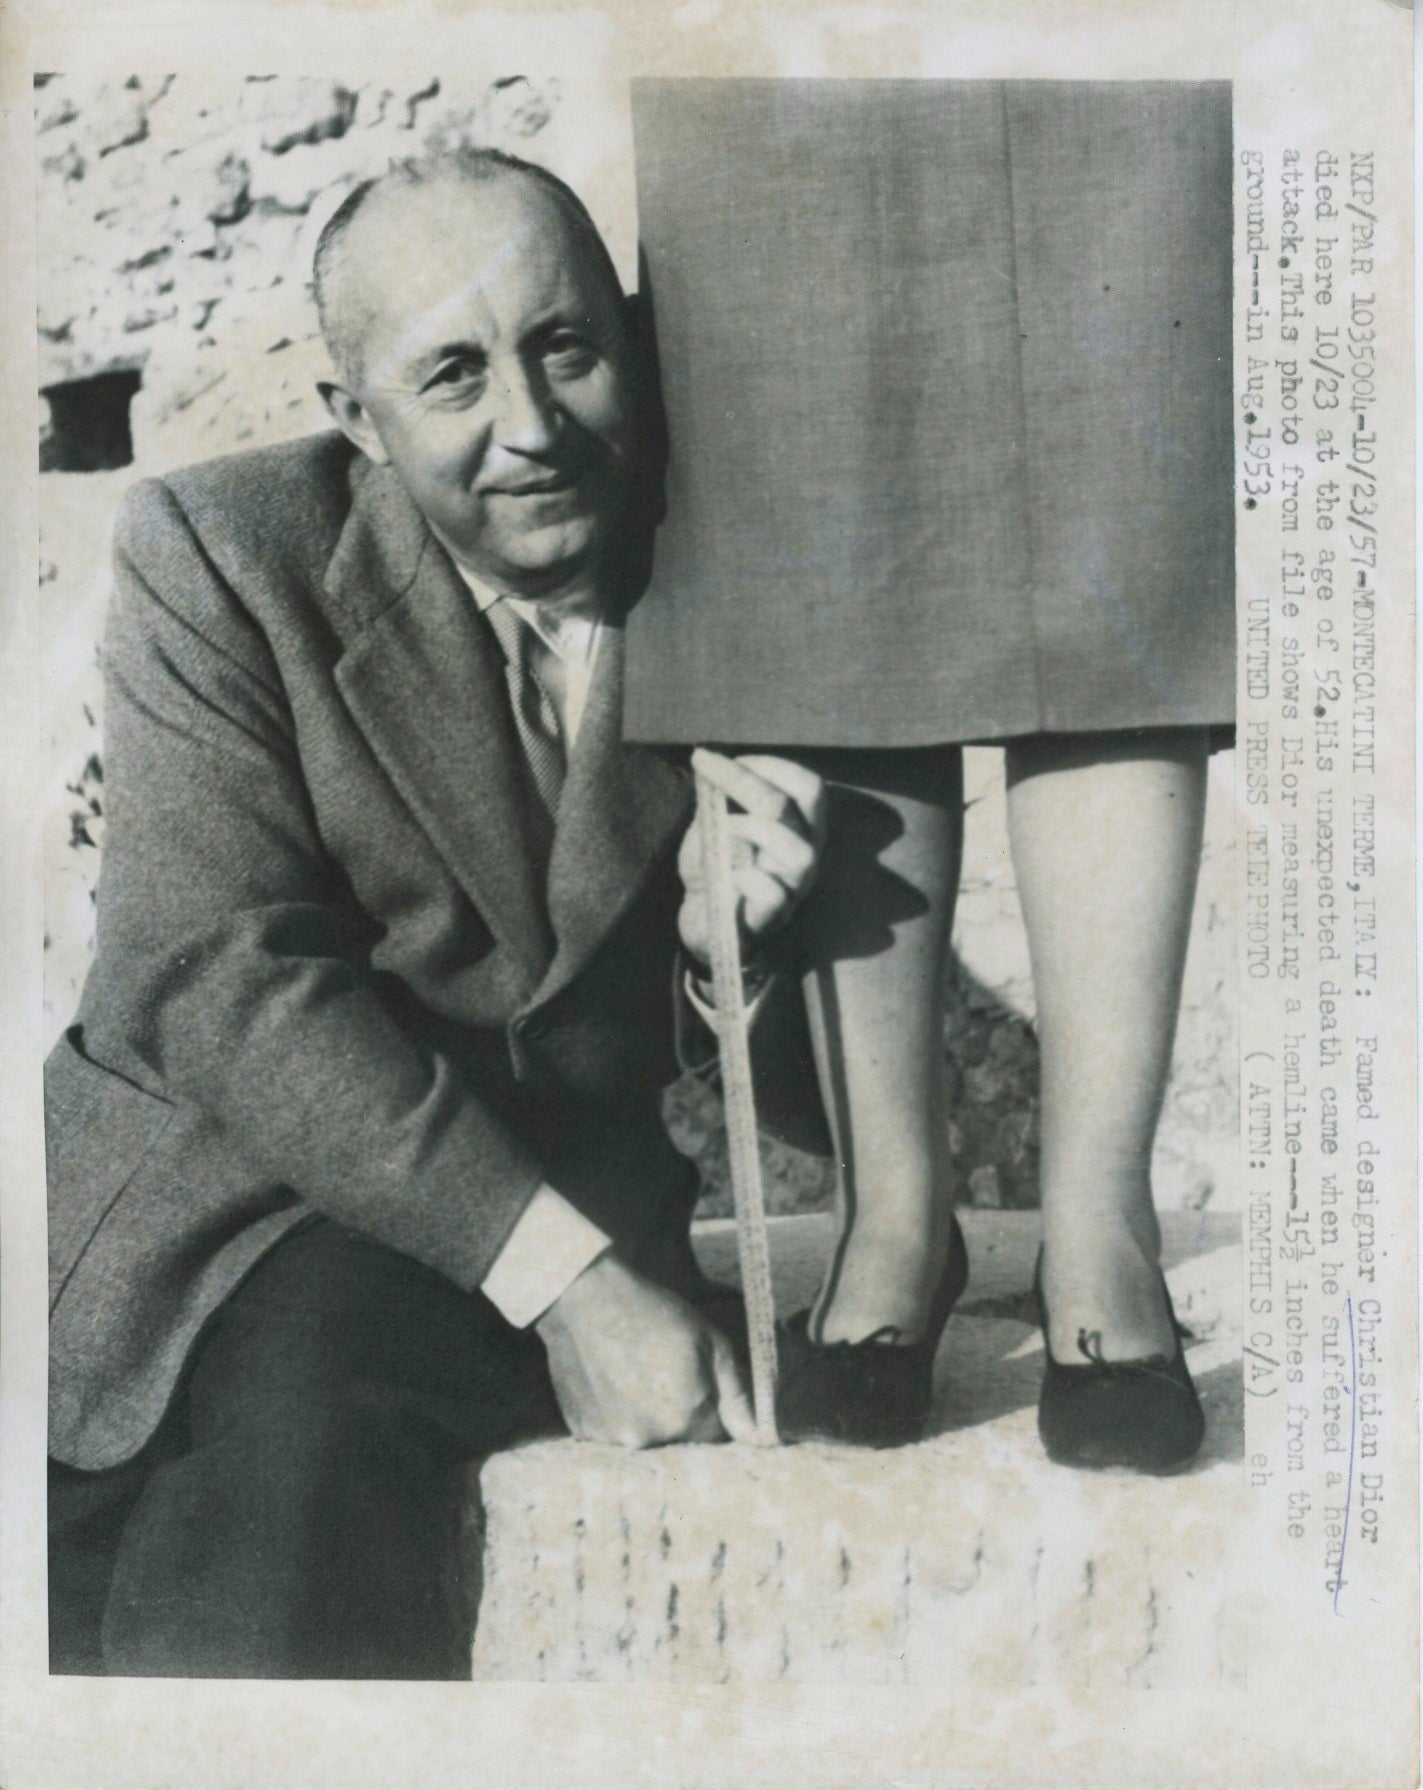 Dior Measures a hemline – 1953 Photograph published for Obituary United Press Telephoto press photograph